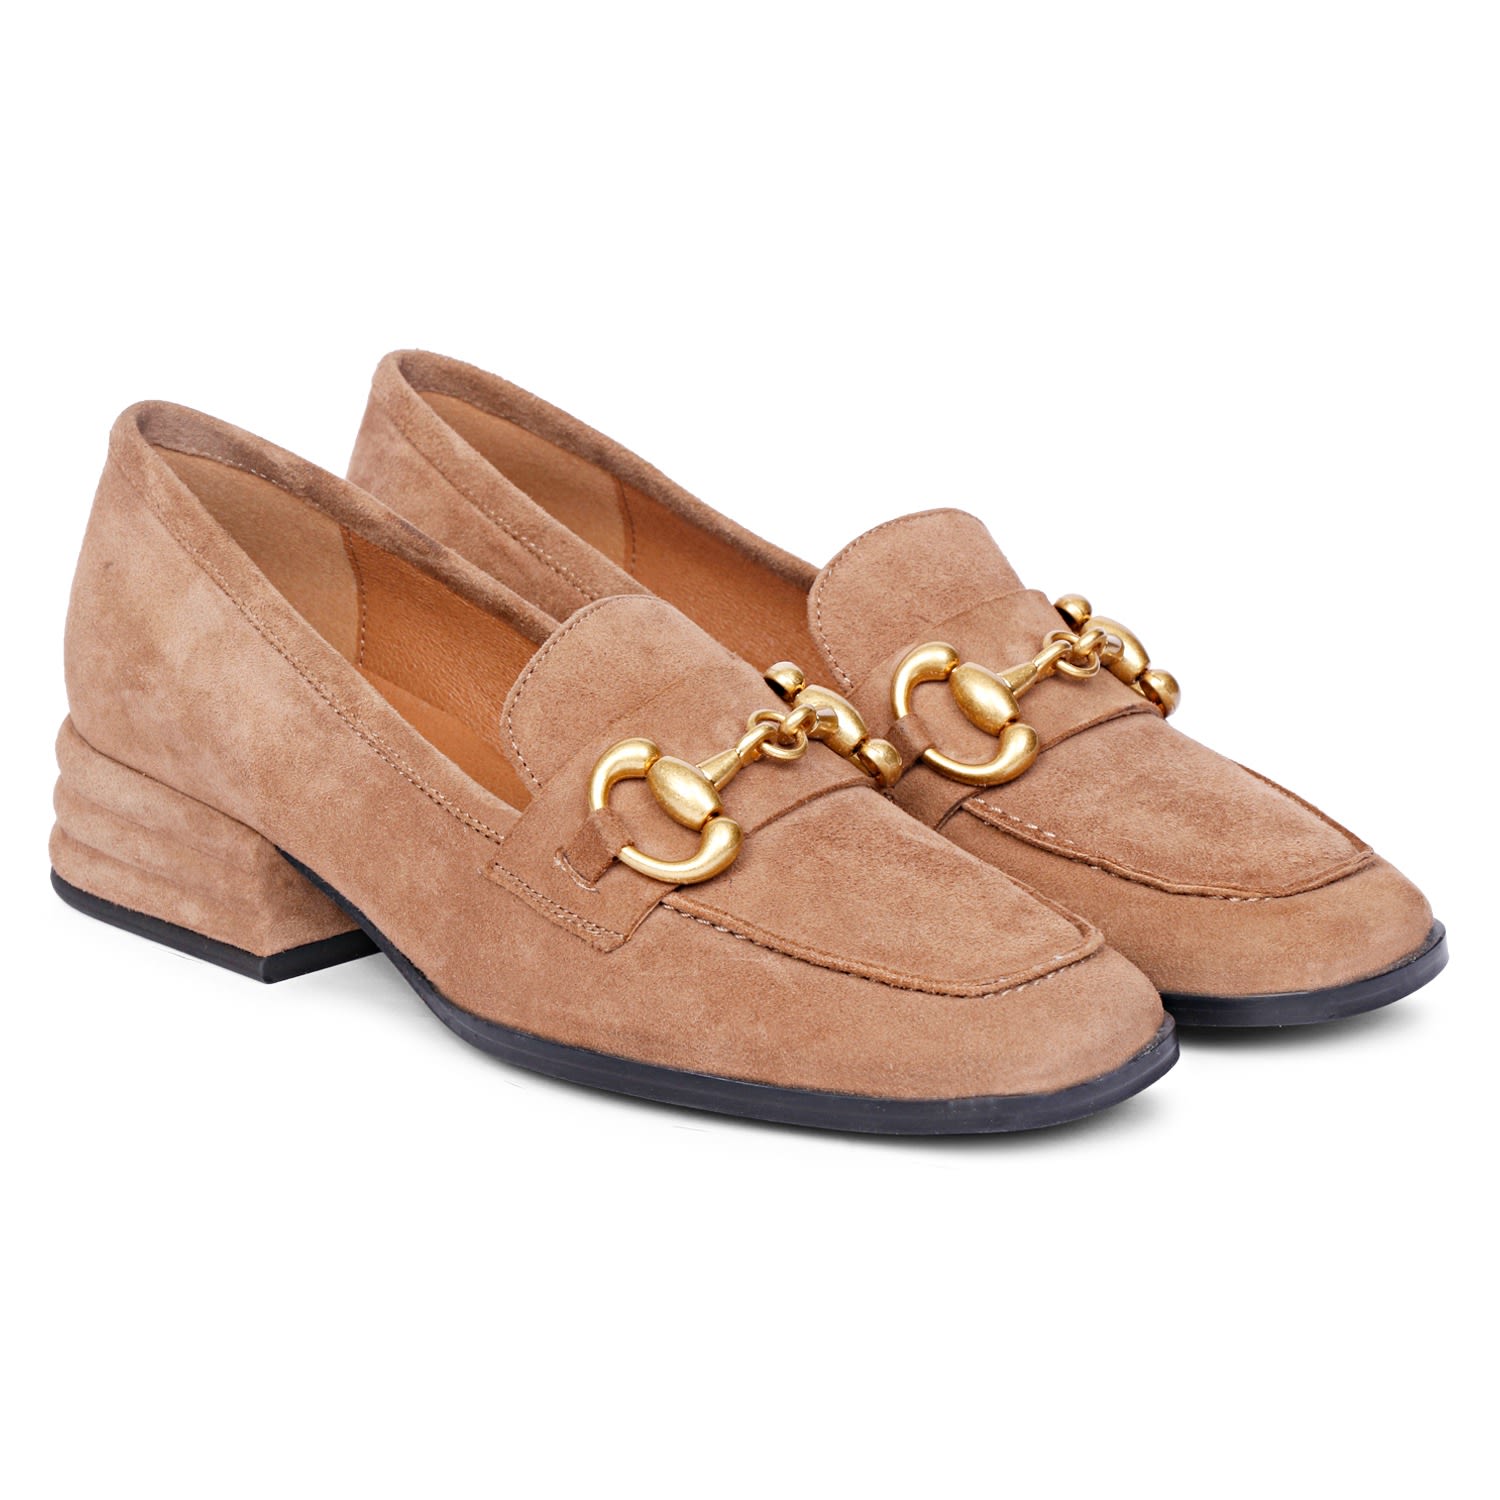 Saint G Women's Rose Gold Jenny Suede Loafer - Taupe